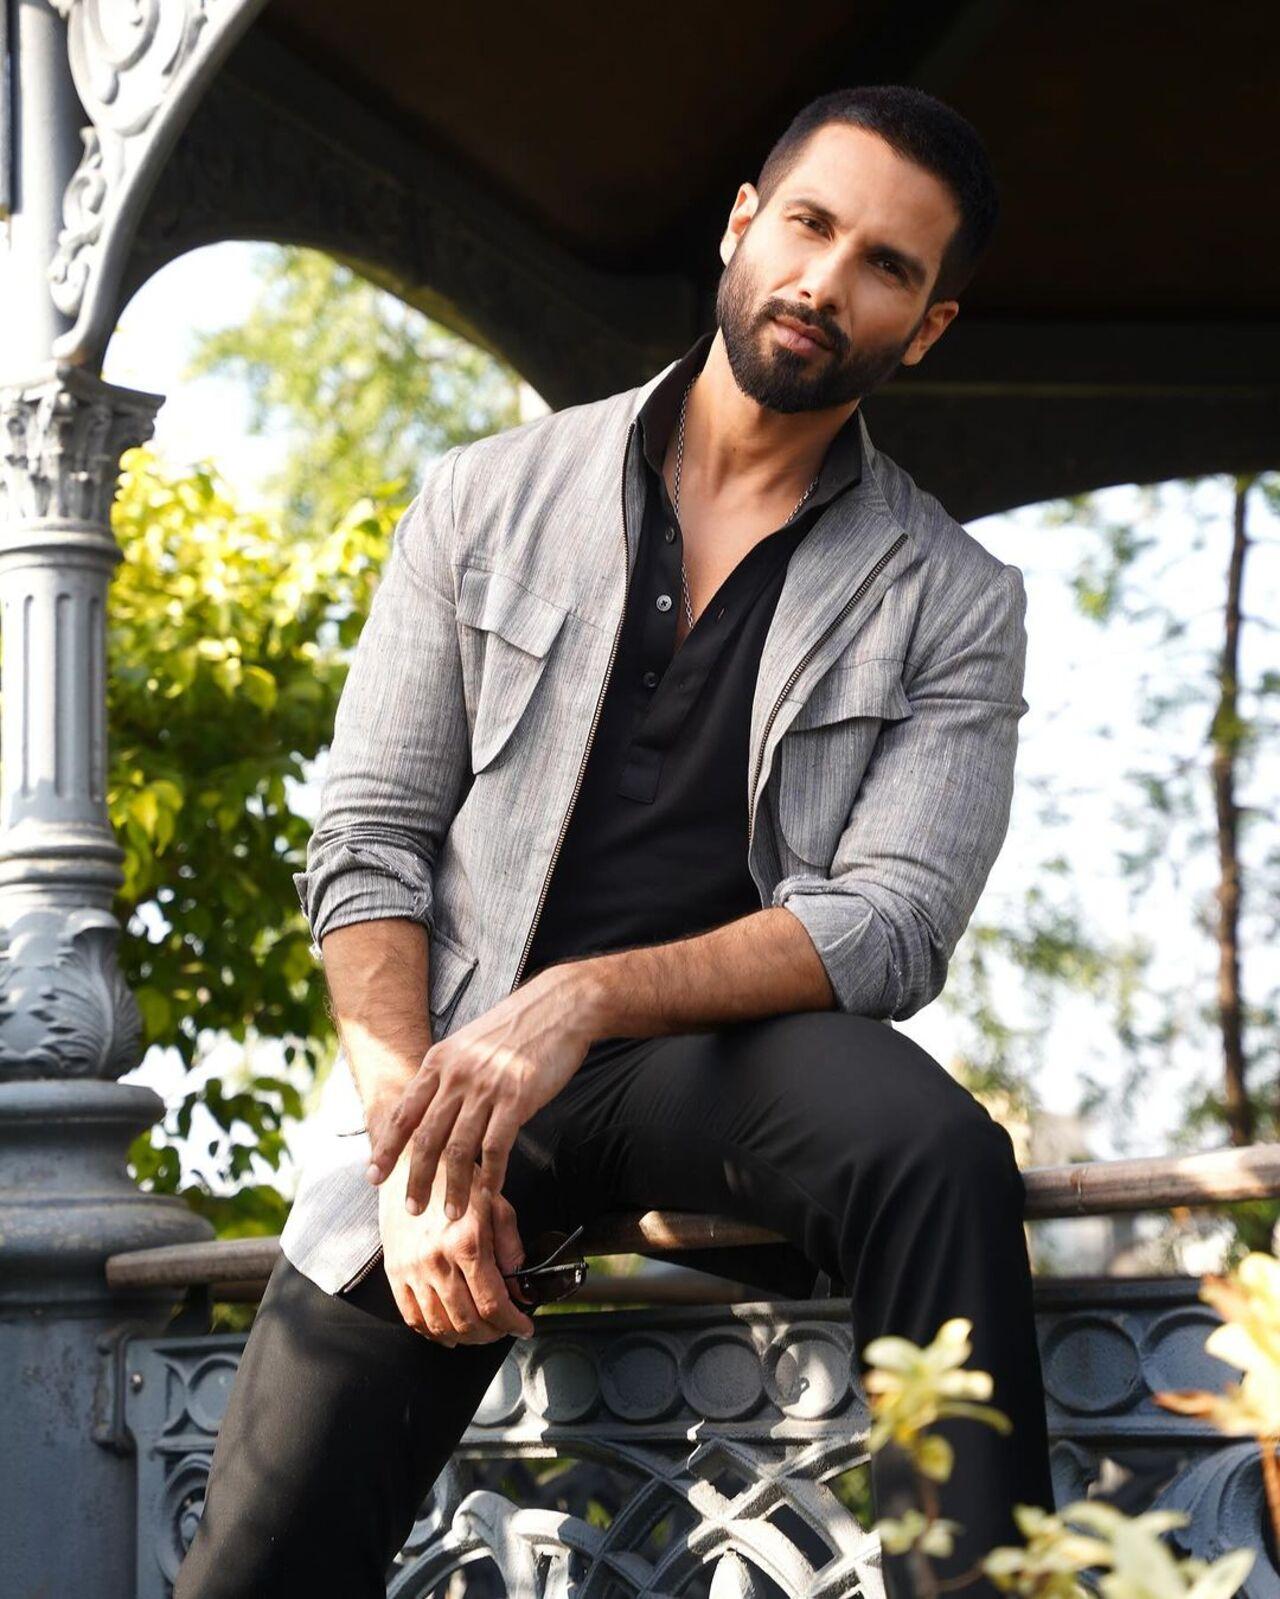 The deep neck of the black t-shirt and the four pockets of the blazer are surely the highlight of the outfit. Shahid accessorized the look with a silver chain